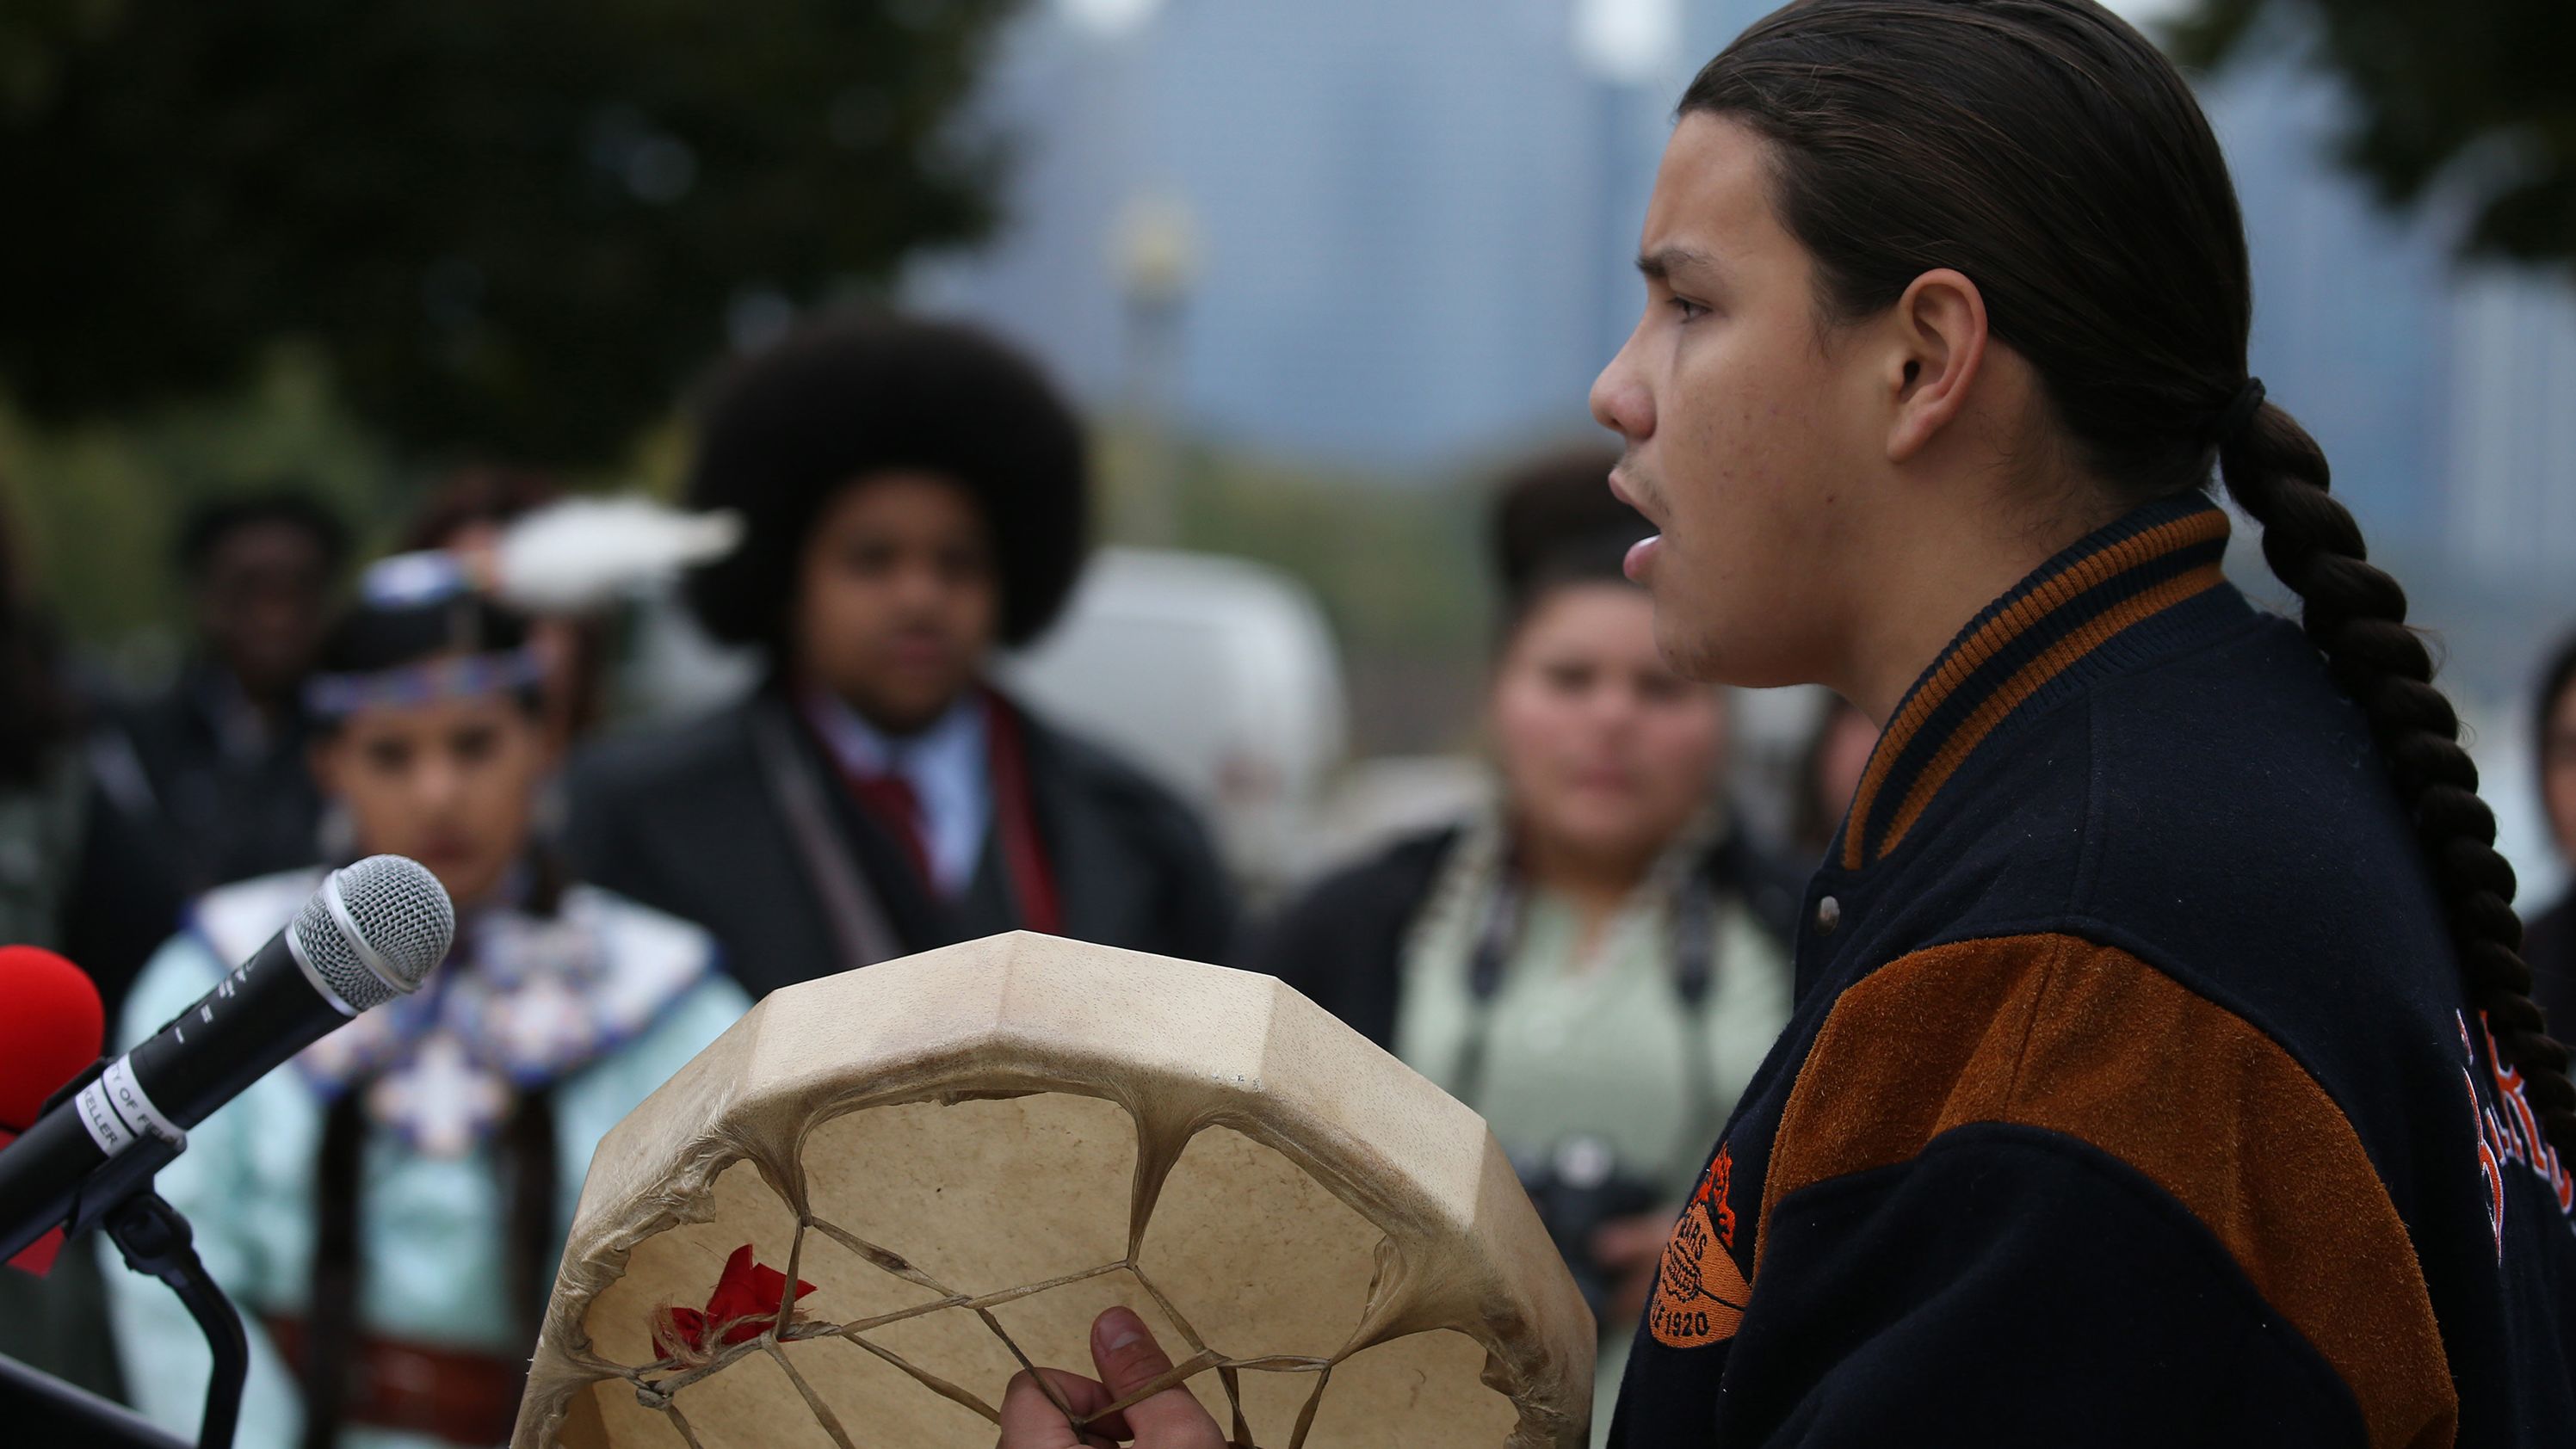 Adrien Pochel, who is Oji-Cree and Lakota, drums and sings during a land acknowledgement ceremony for Chicago's Field Museum on October 26, 2018.